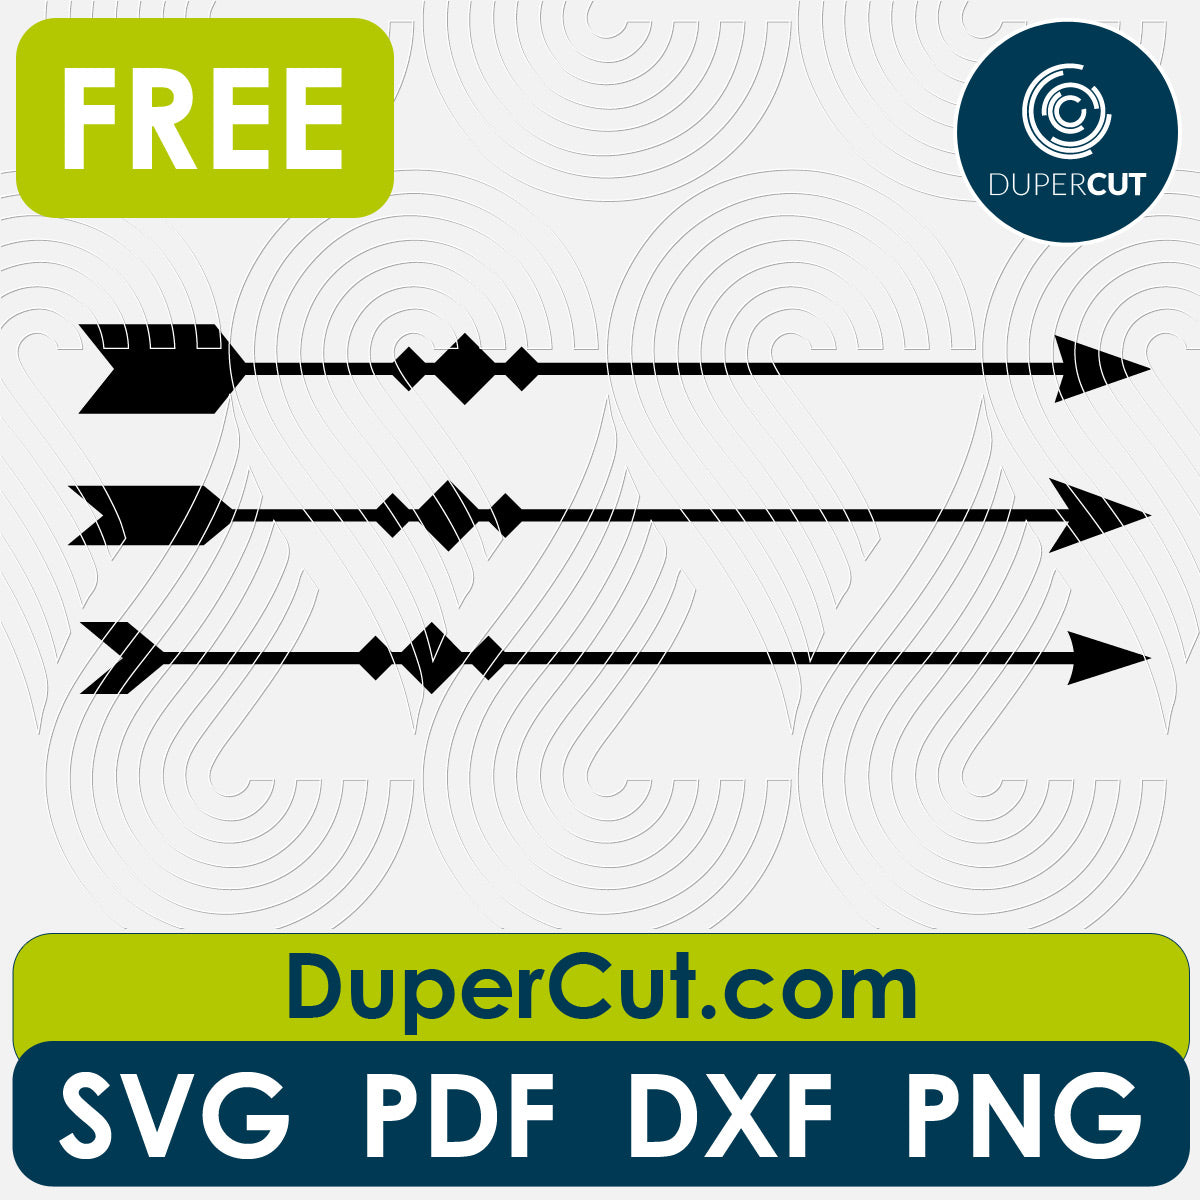 Simple arrows - free SVG PNG DXF vector files for laser and blade cutting machines. Glowforge, Cricut, Silhouette cameo templates by www.DuperCut.com